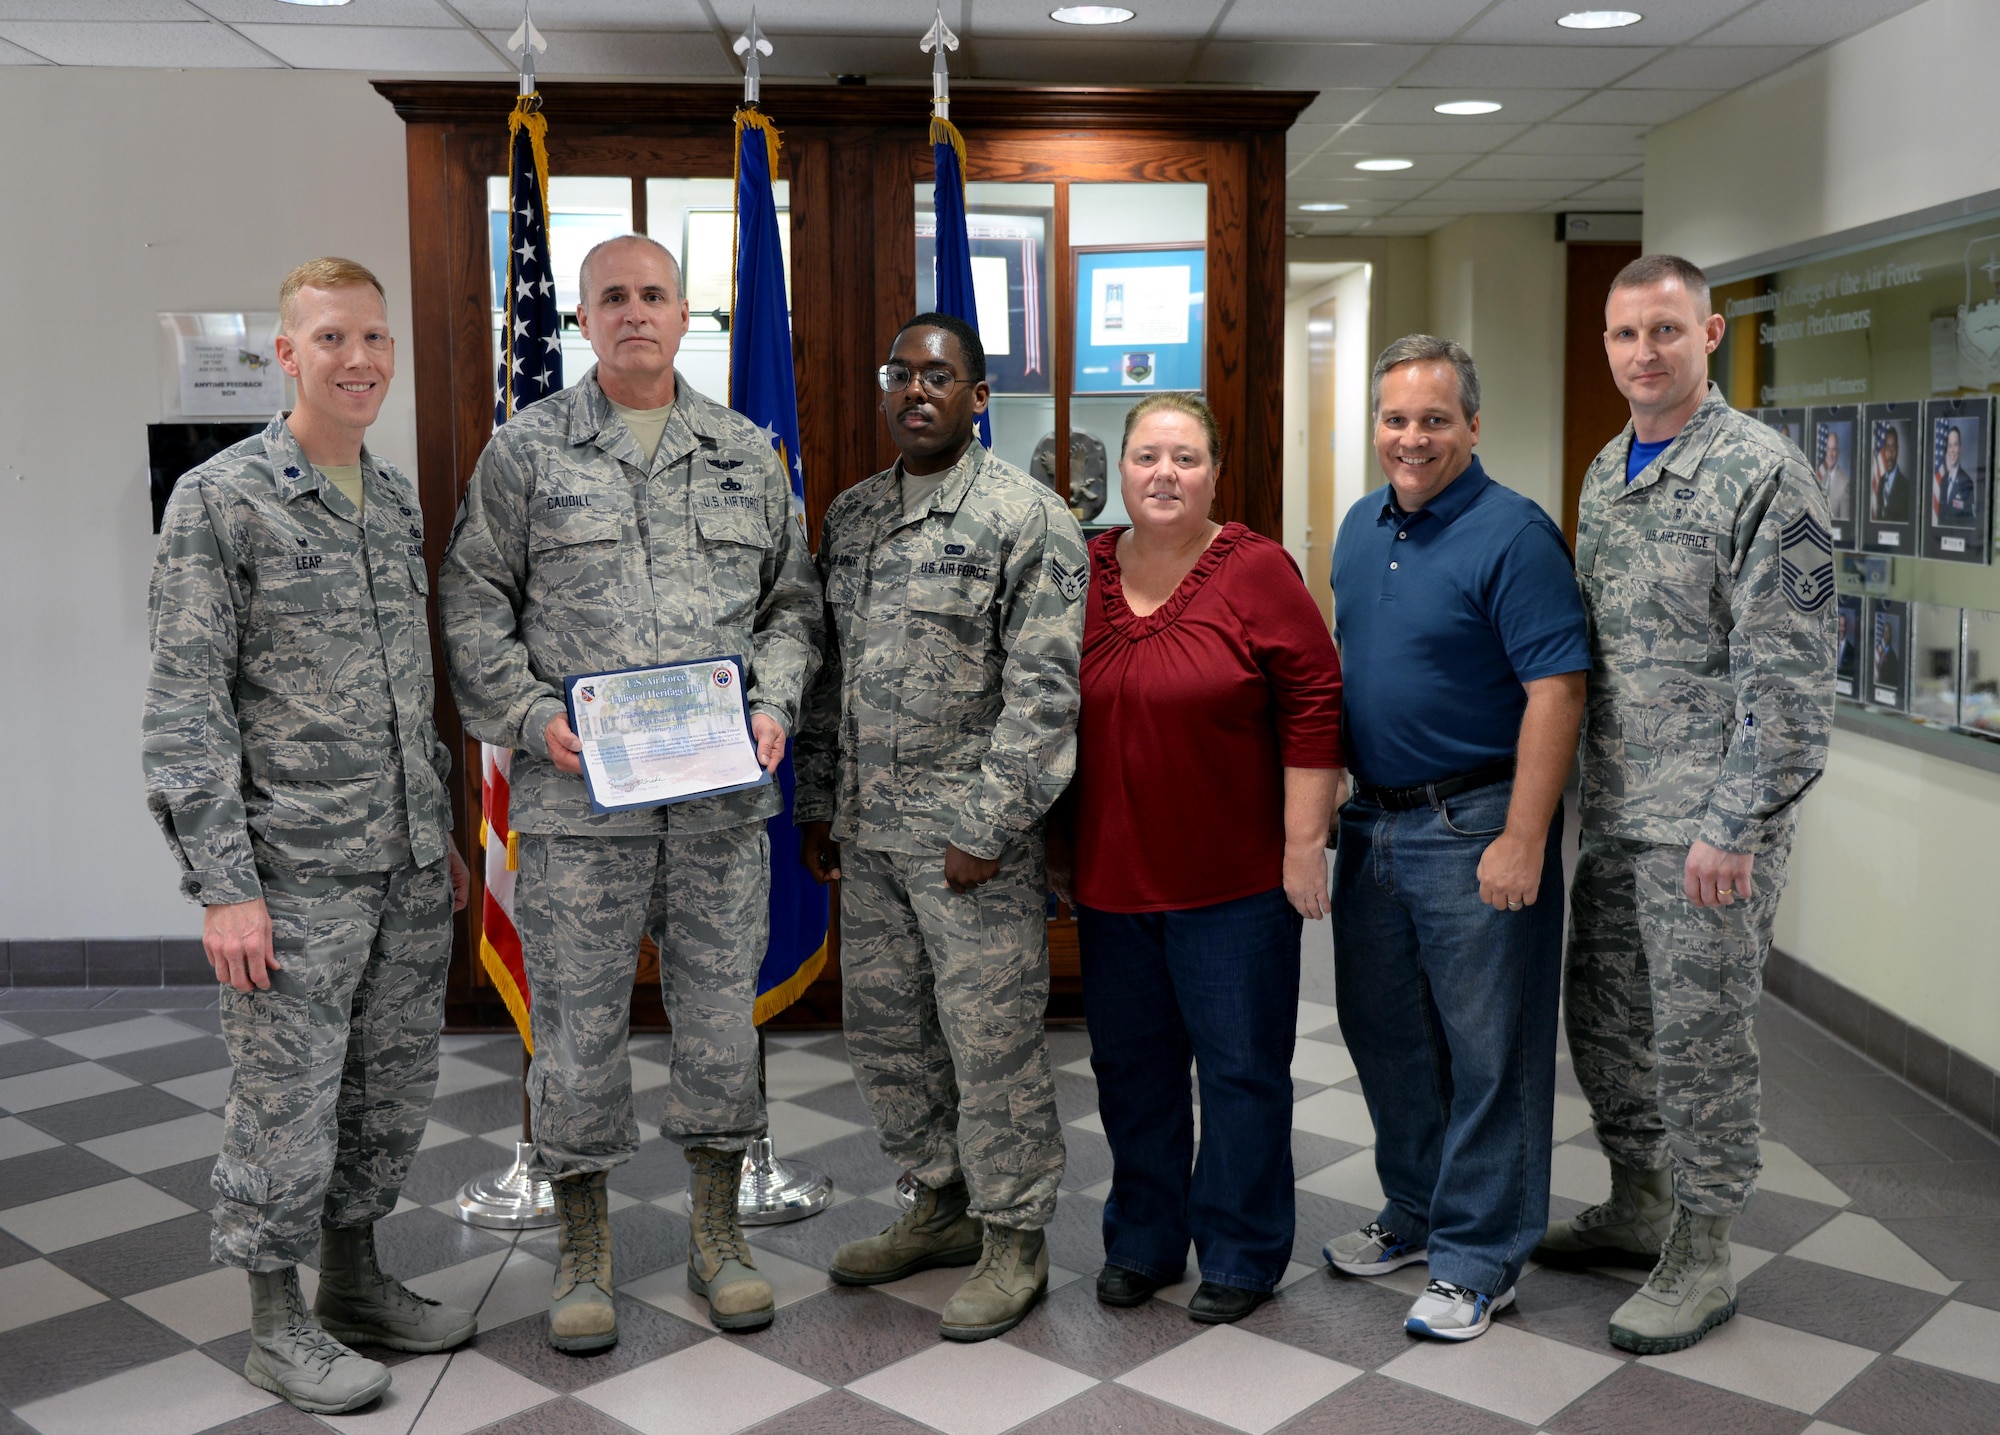 Members of the Community College of the Air Force stand with the 500,000th CCAF graduate on Maxwell Air Force Base, Ala., April 21, 2017. Senior Master Sgt. Duane Caudill graduated as the 500,000th graduate in November 2016, marking a historical event for the CCAF since opening its doors in 1972. (U.S. Air Force photo/Senior Airman Tammie Ramsouer)